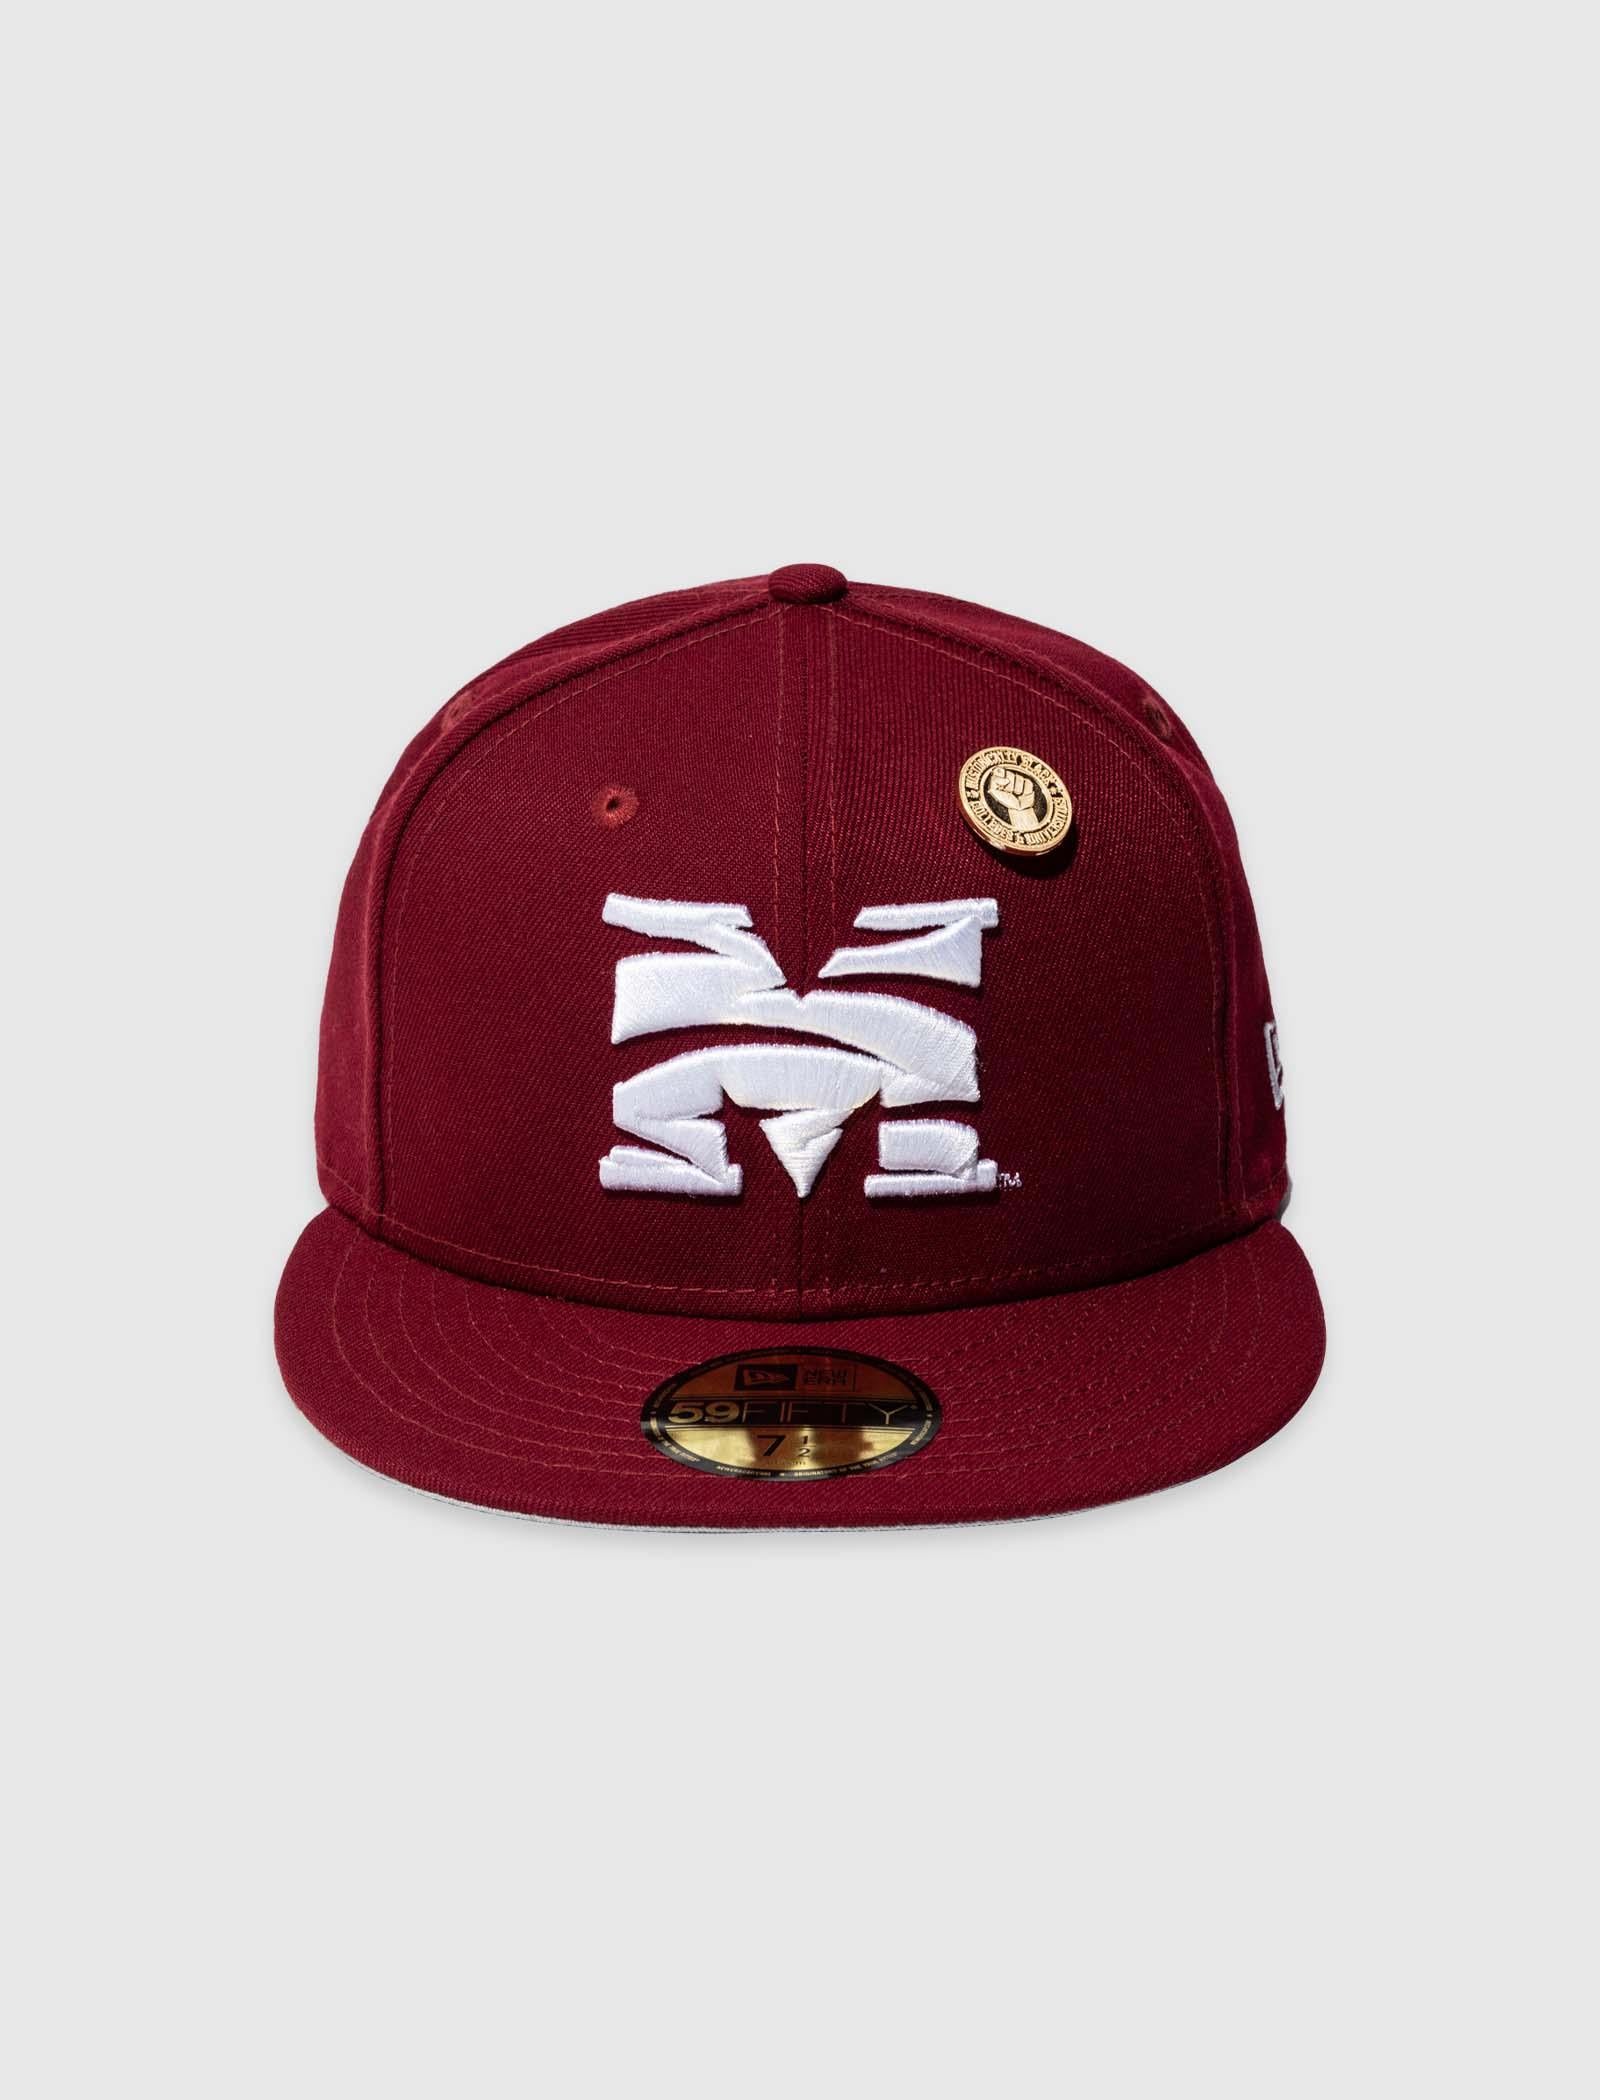 MOREHOUSE TIGERS FITTED HAT